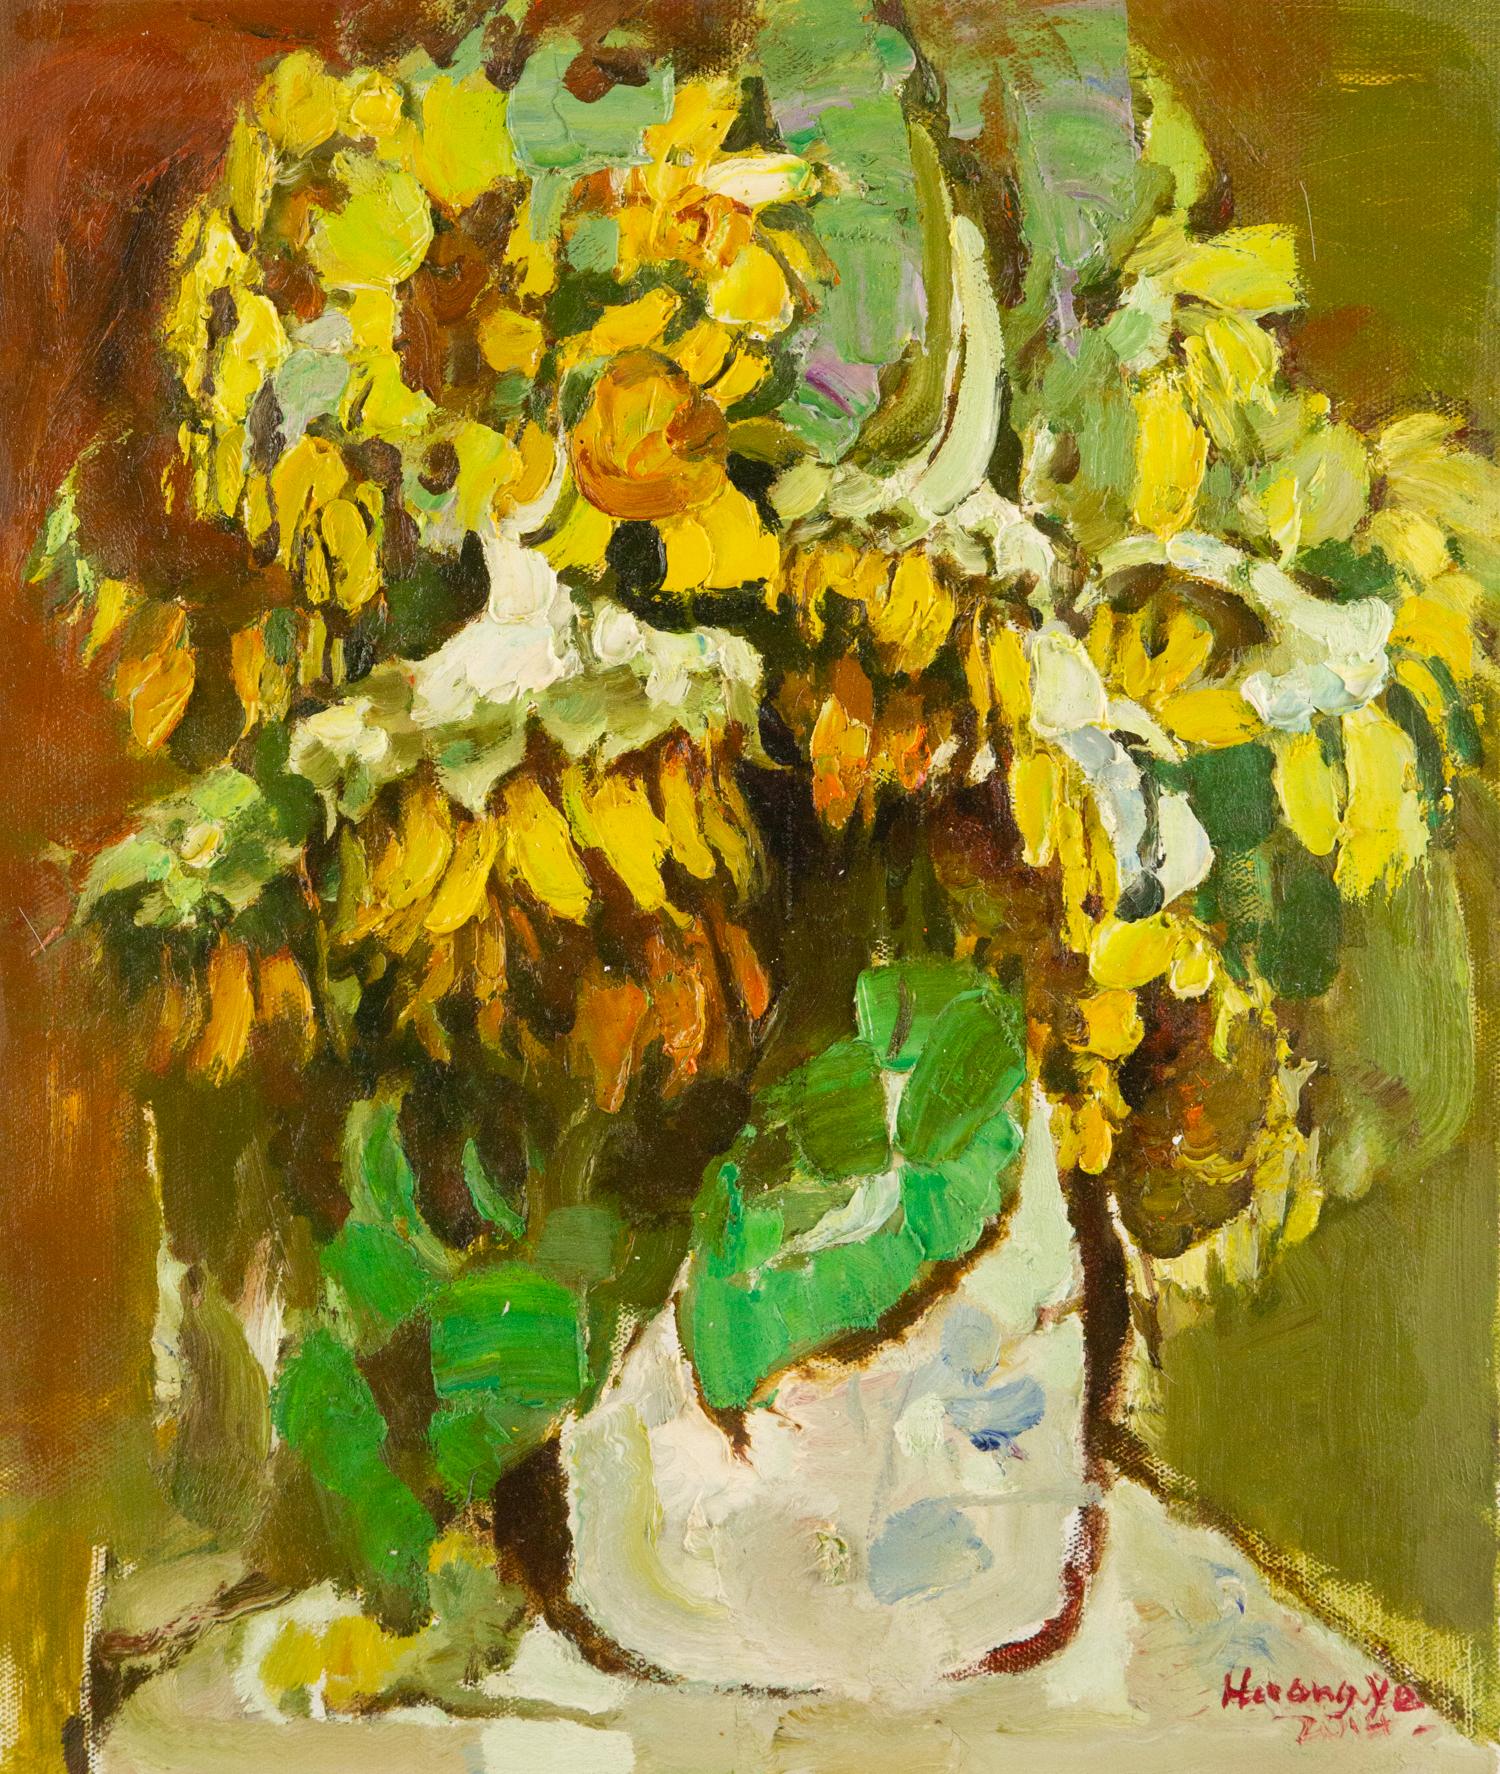  Title: Sunflowers
 Medium: Oil on canvas
 Size: 21 x 17.5 inches
 Frame: Framing options available!
 Condition: The painting appears to be in excellent condition.
 Note: This painting is unstretched
 Year: 2000 Circa
 Artist: Huang Ye
 Signature: